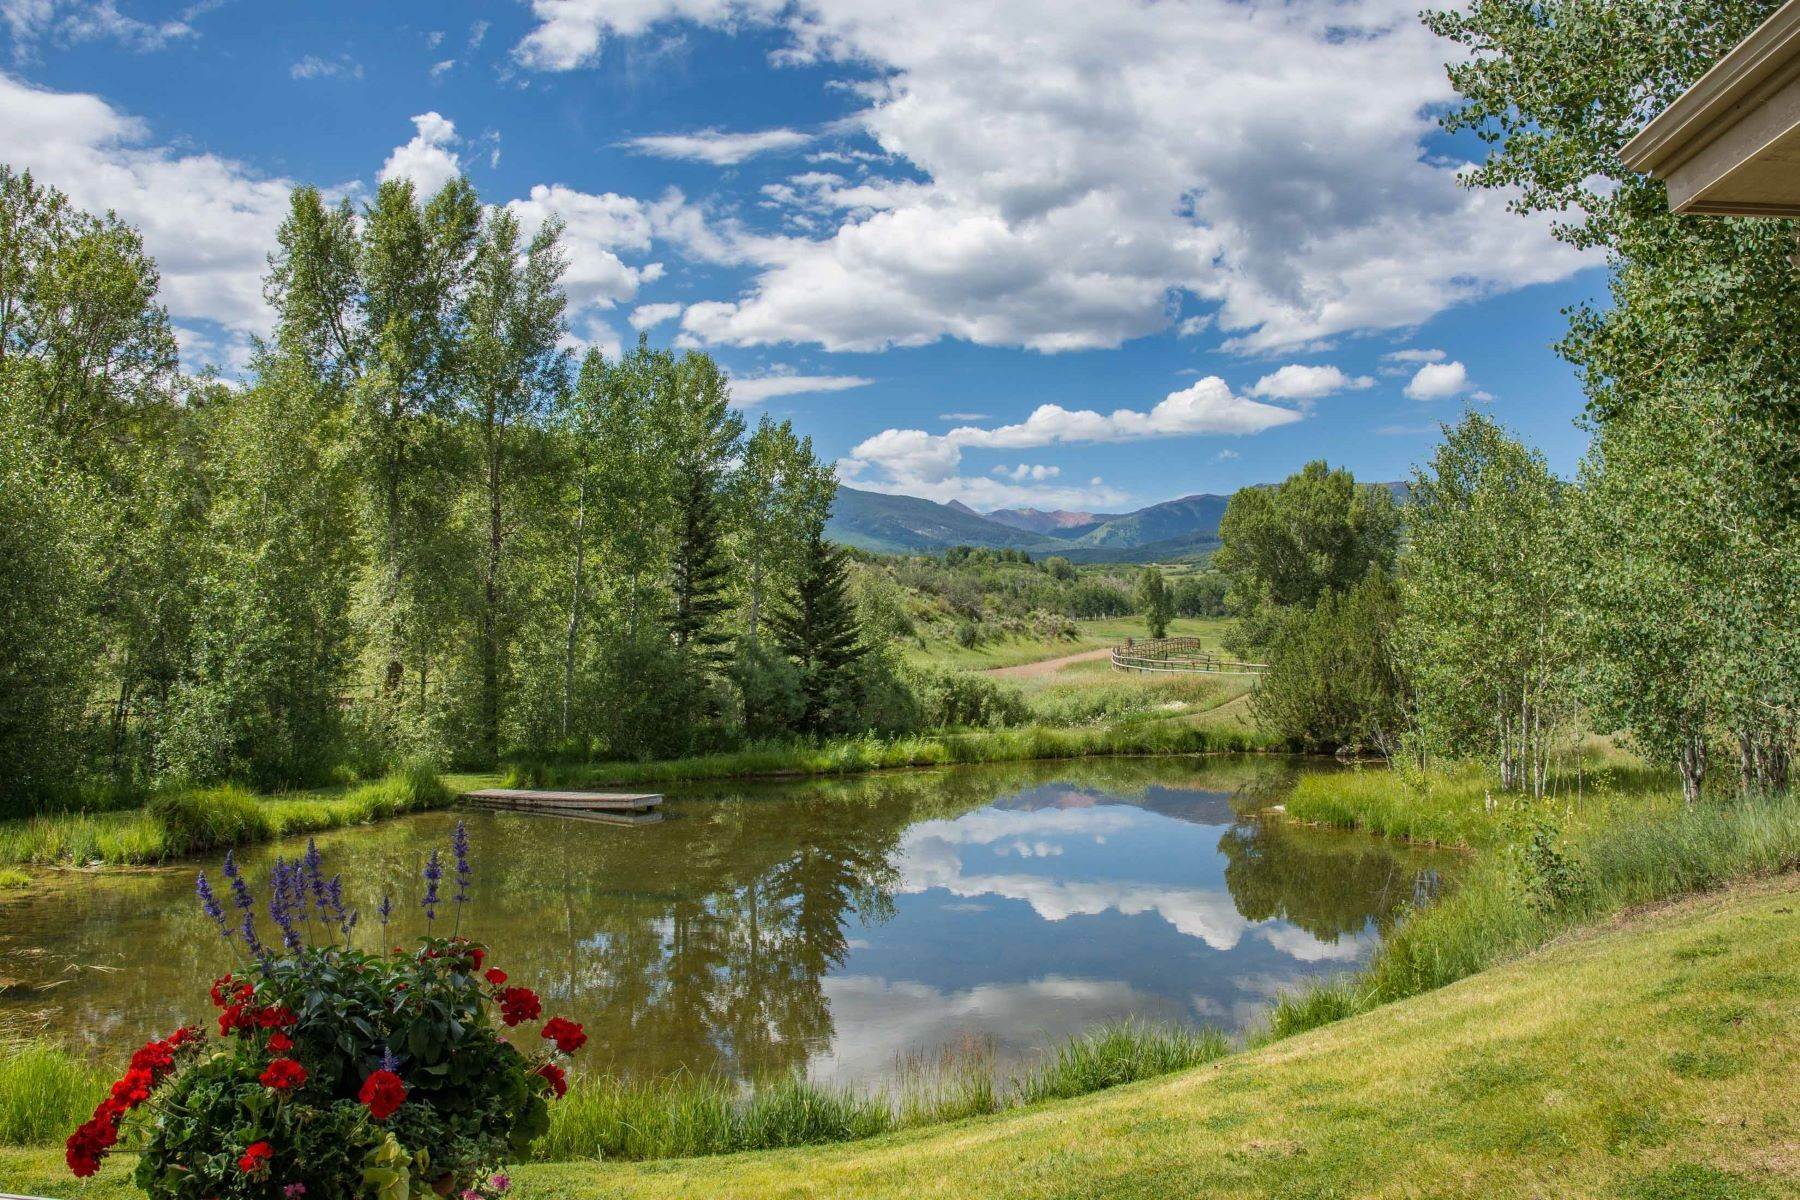 Farm and Ranch Properties для того Продажа на RARE and UNIQUE opportunity to own the heart of the renowned McCabe Ranch! 1321 Elk Creek & TBD McCabe Ranch, Old Snowmass, Колорадо 81654 Соединенные Штаты